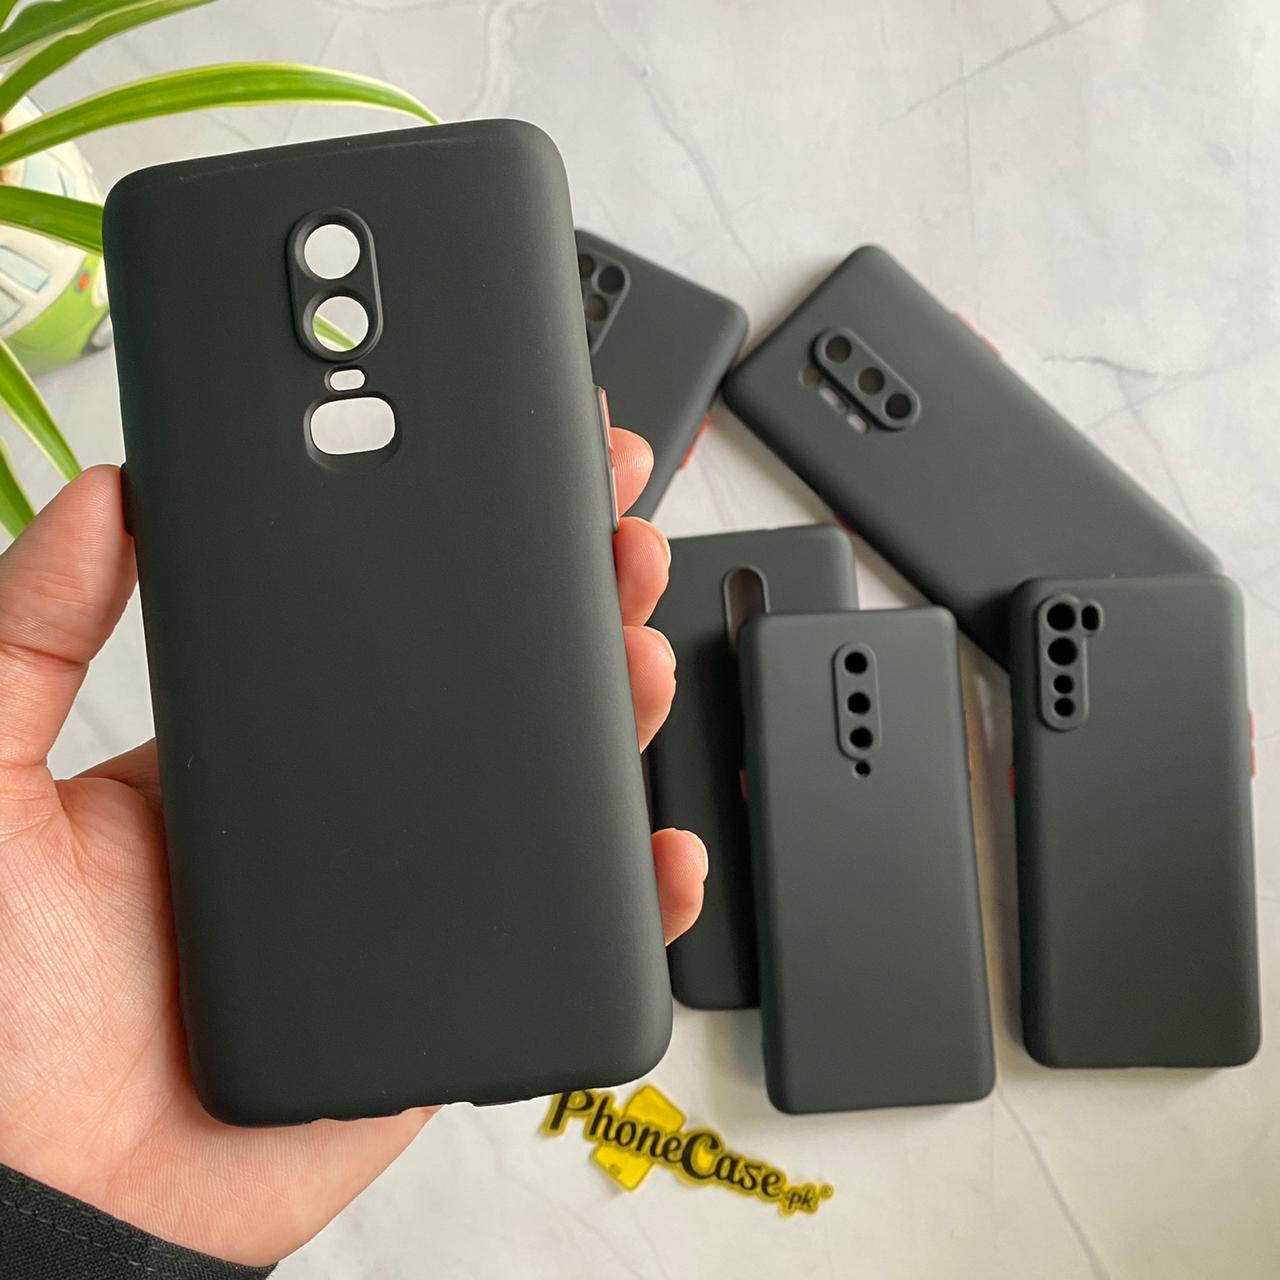 Silicon Candy Hybrid Shock Proof Case For OnePlus Models